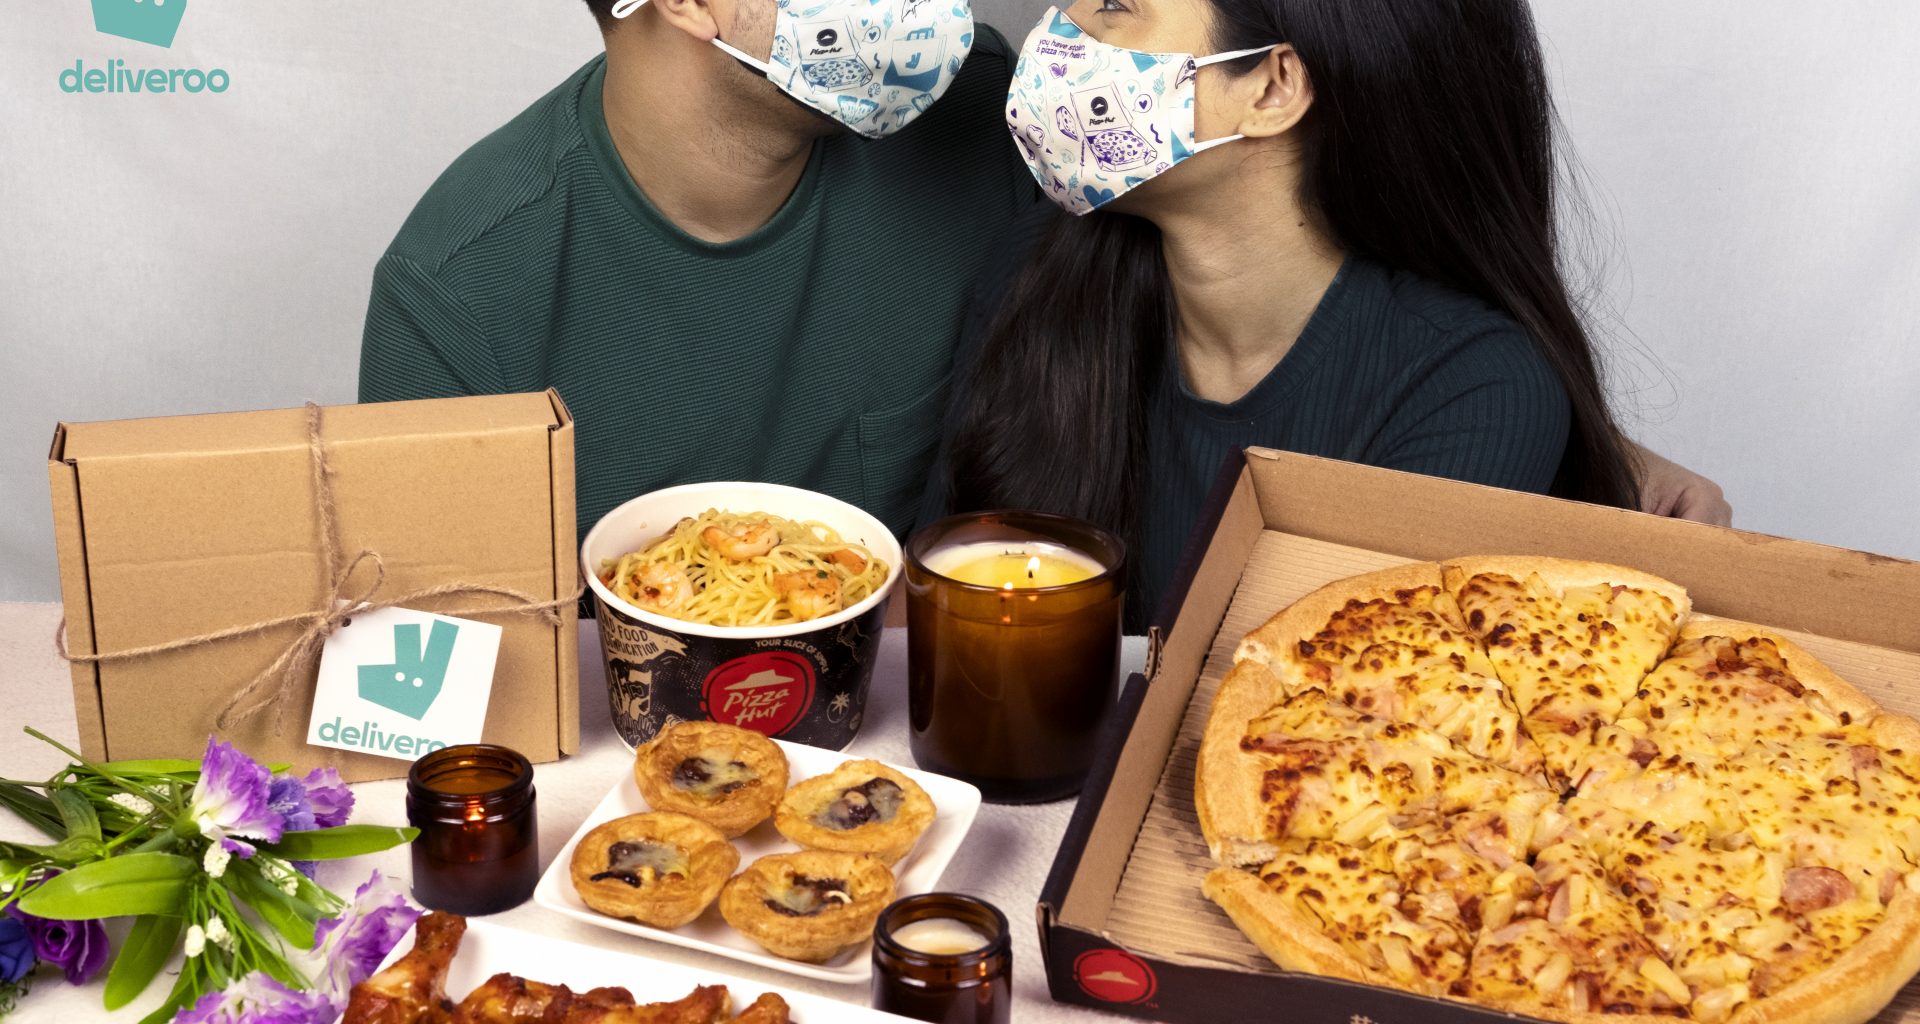 Steal A Pizza My Heart This Valentine’s Day With Limited-Edition Deliveroo and Pizza Hut Couples Face Masks - Alvinology